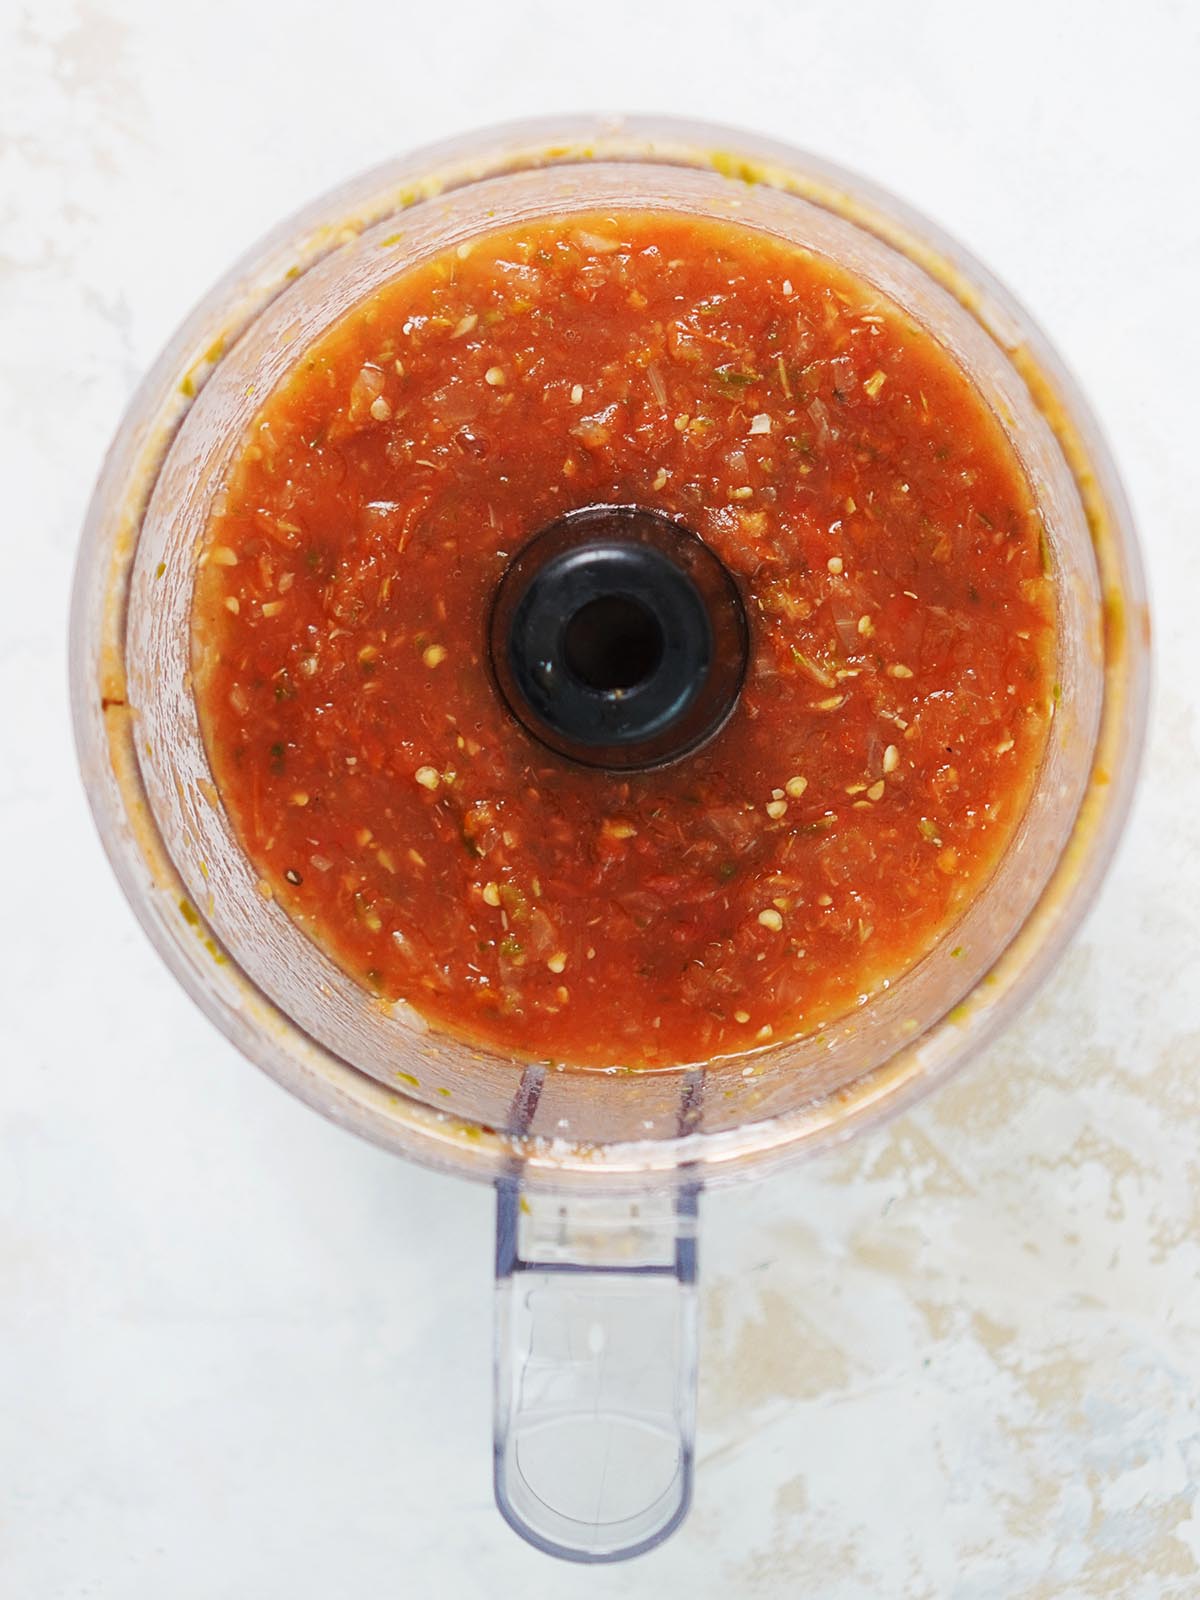 Mixed red salsa in the container of a food processor.